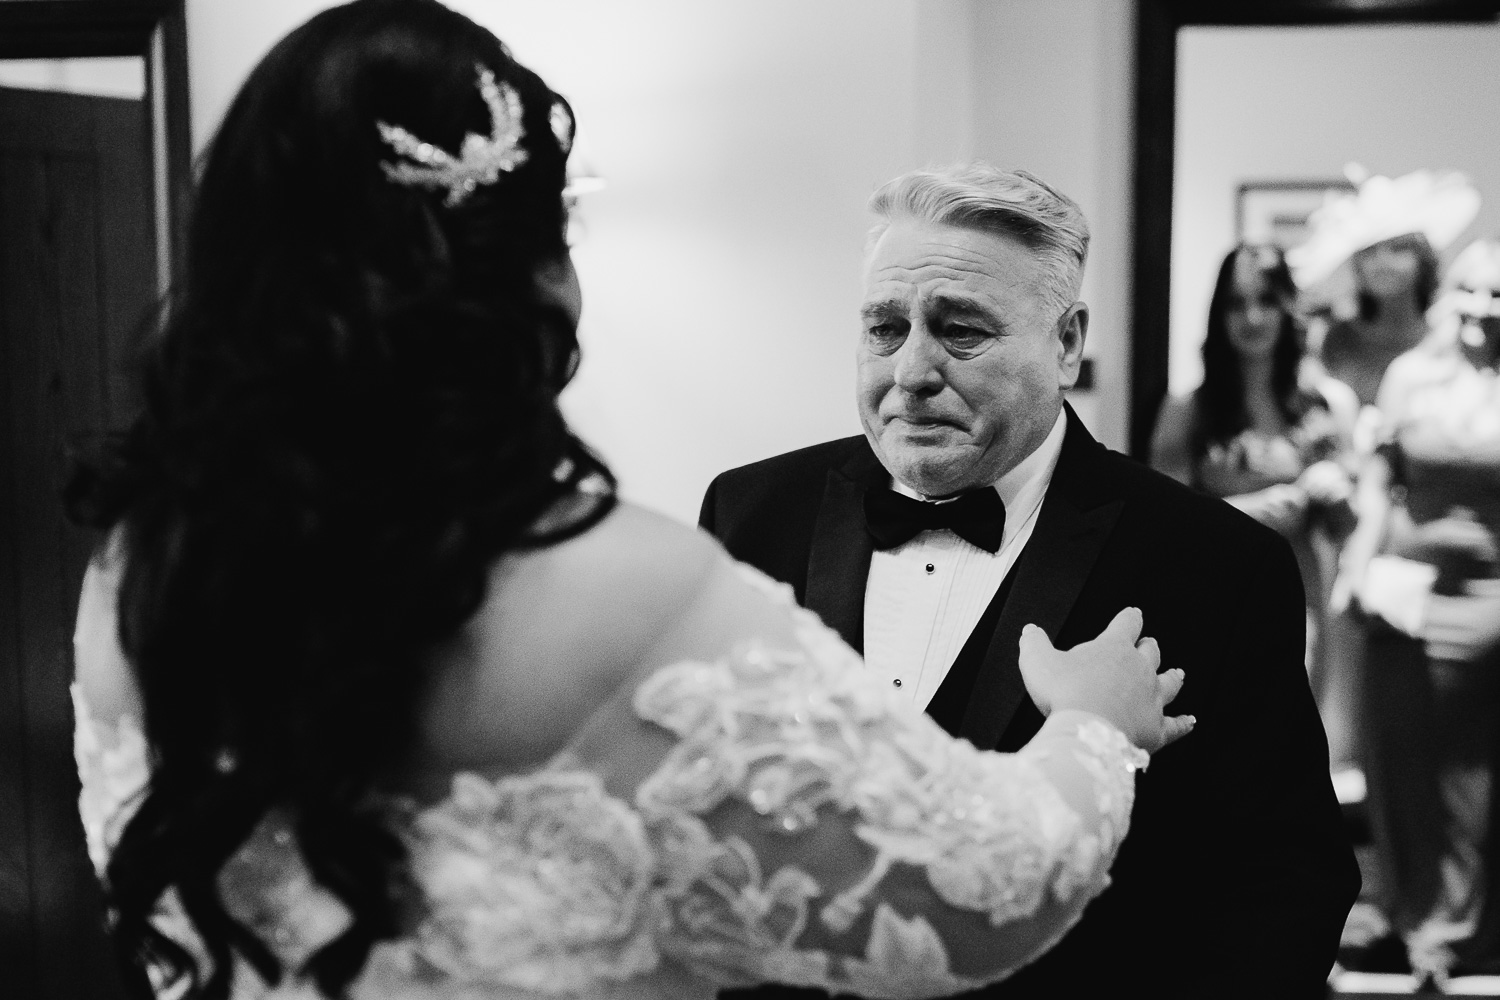 Bride seeing her dad for the first time